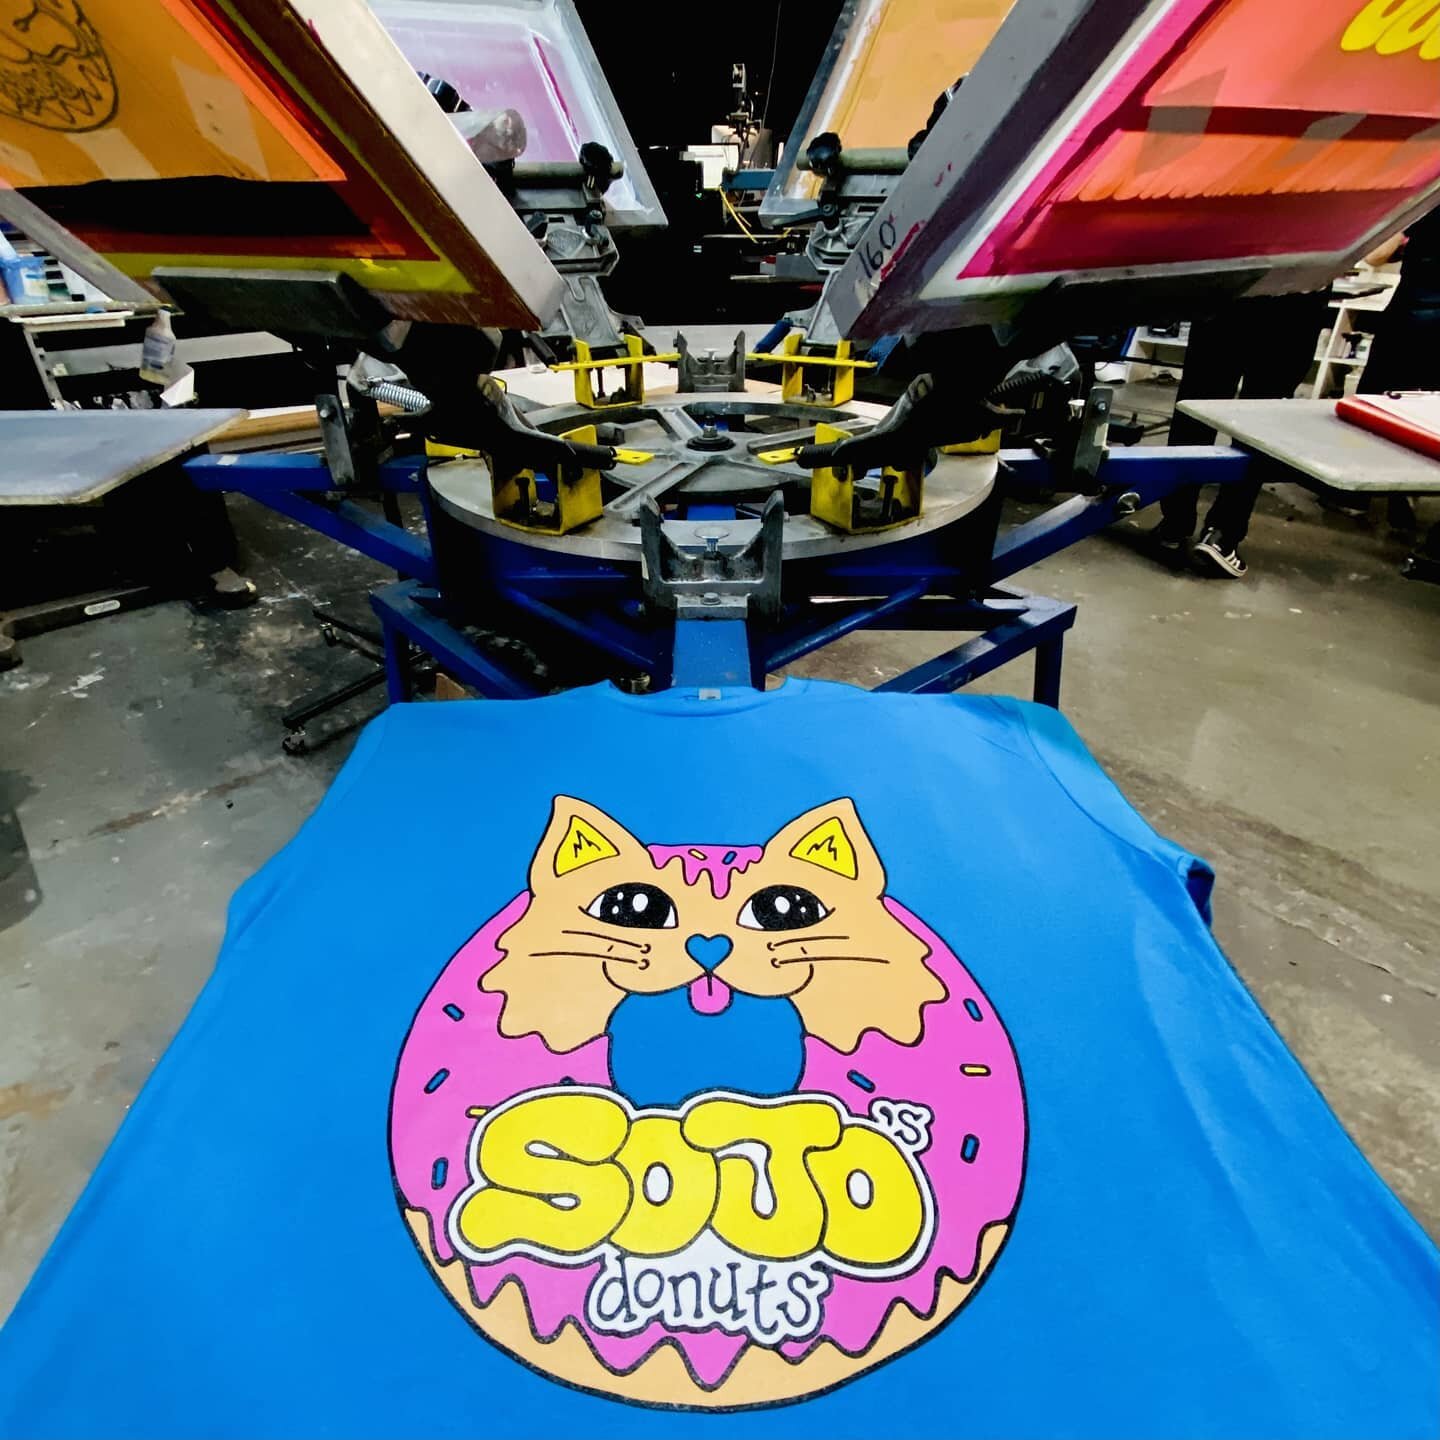 Look at those colors! It helps having such a sick looking design @sojosdonuts